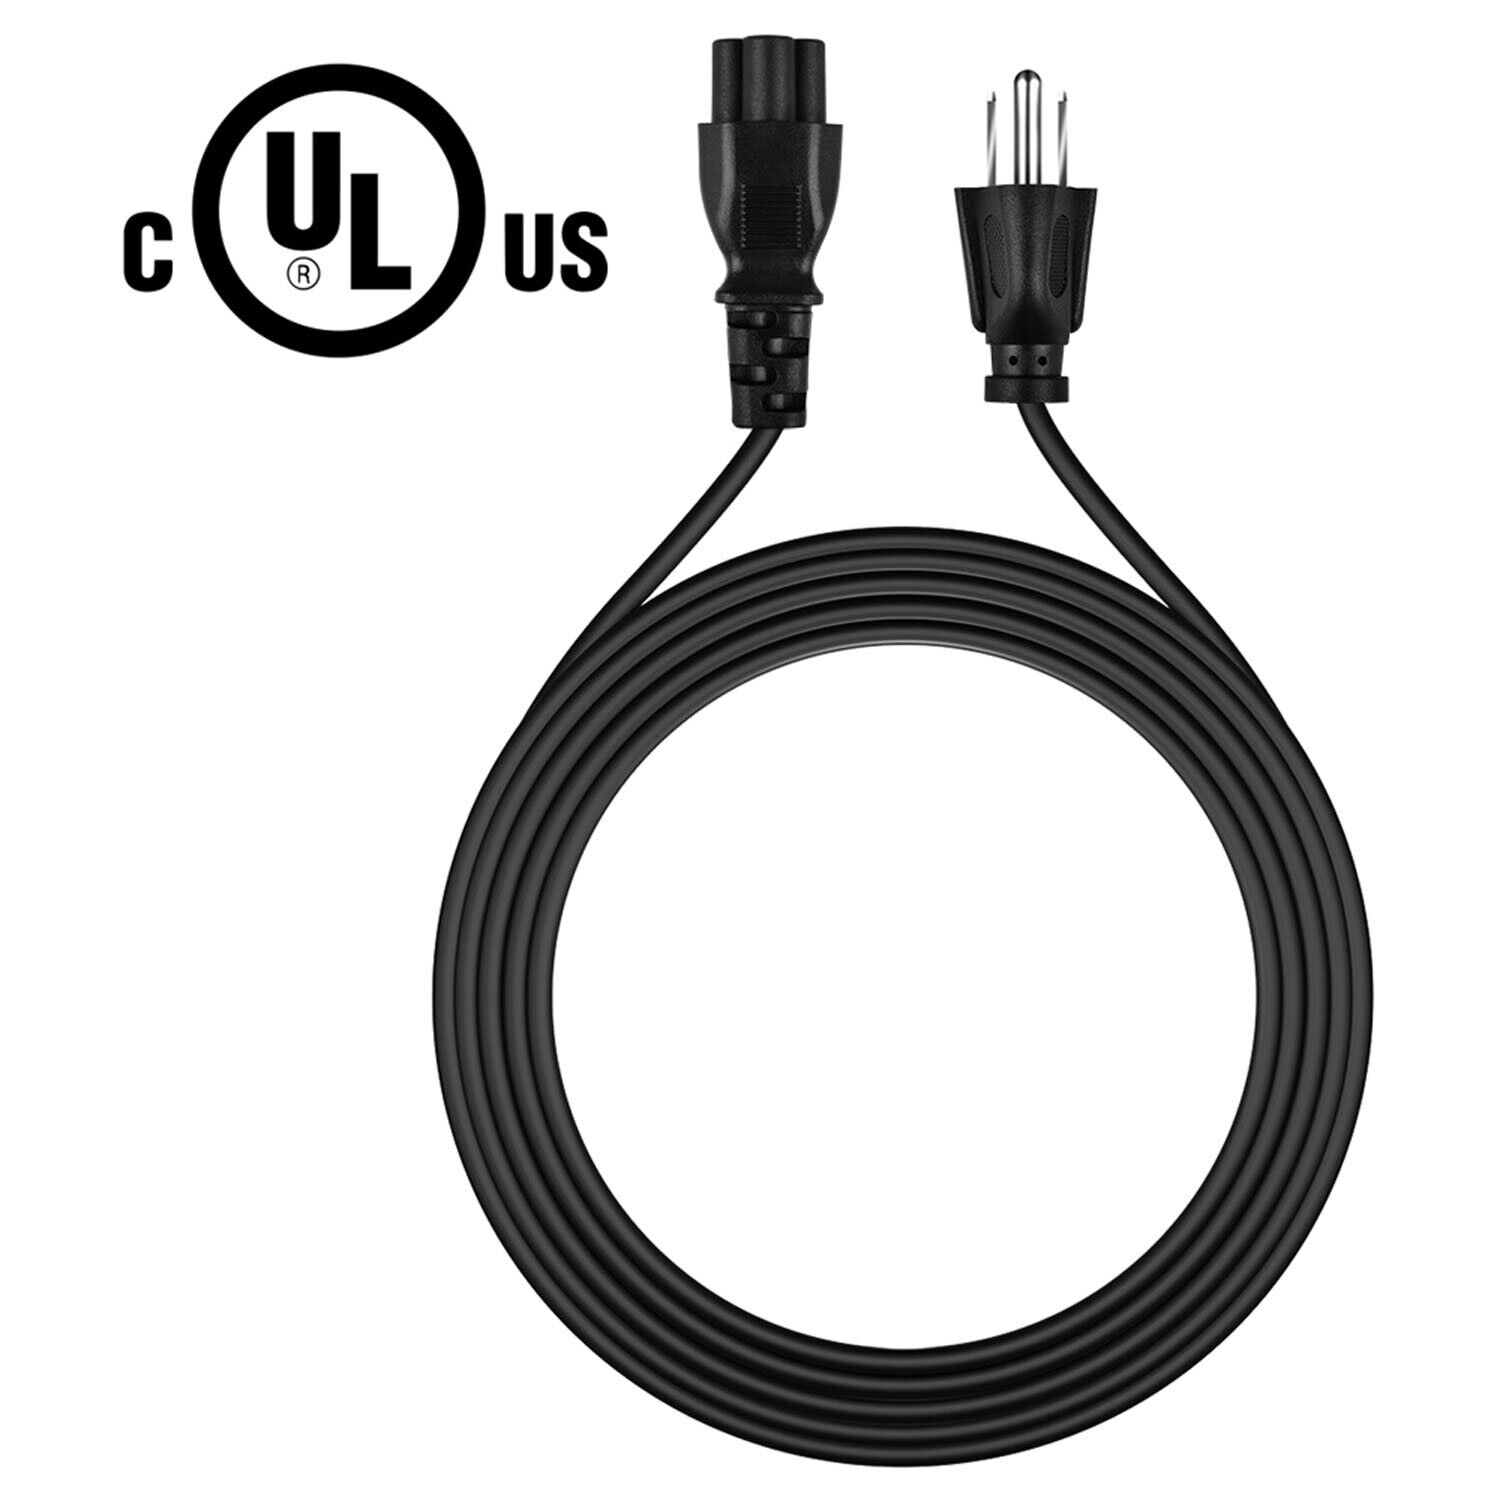 5ft UL AC Power Cord Cable Plug For Dell Inspiron N7010 N7110 Laptop 3-Prong US